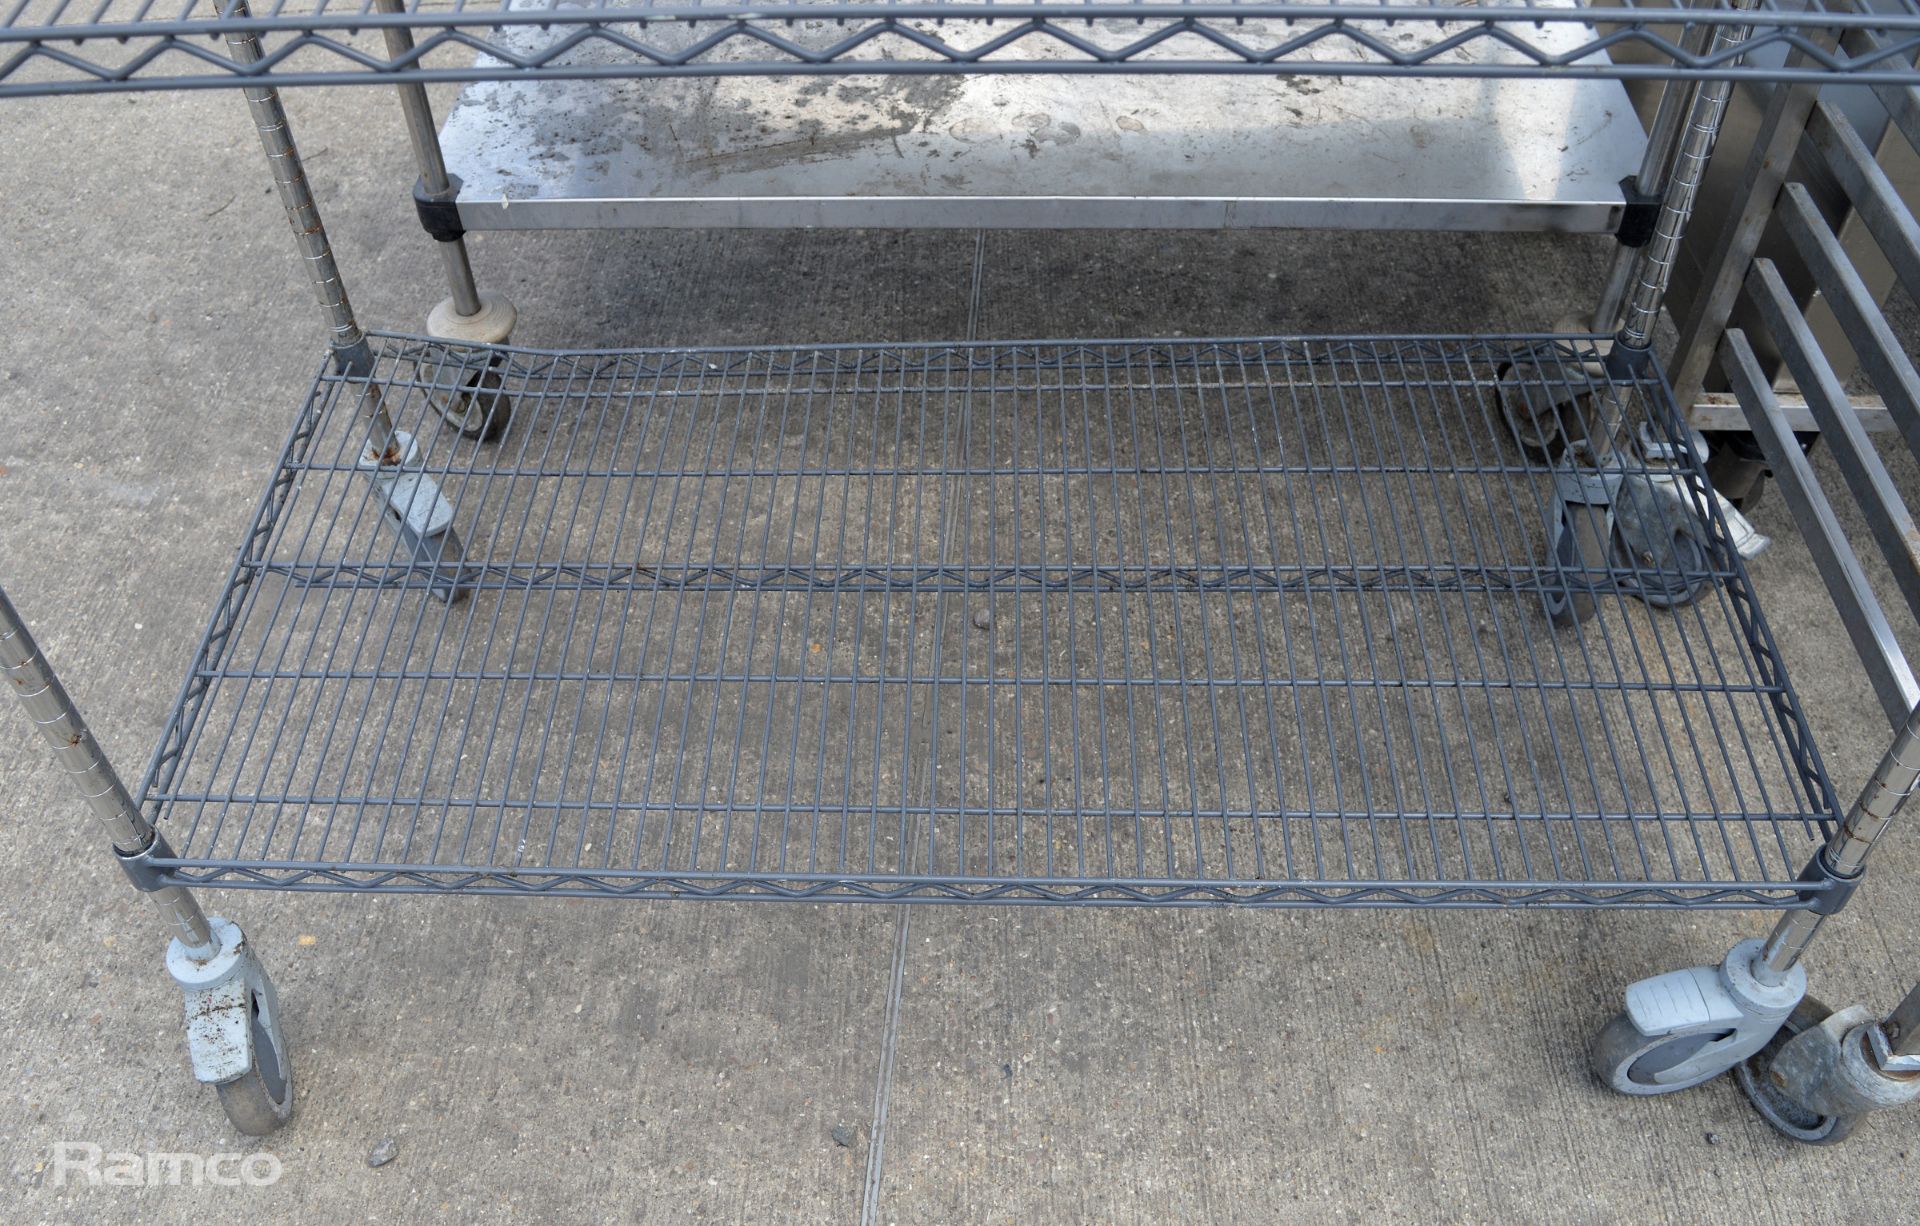 Stainless steel 4 tier wire racking L120 X W60 x H177cm - Image 2 of 3